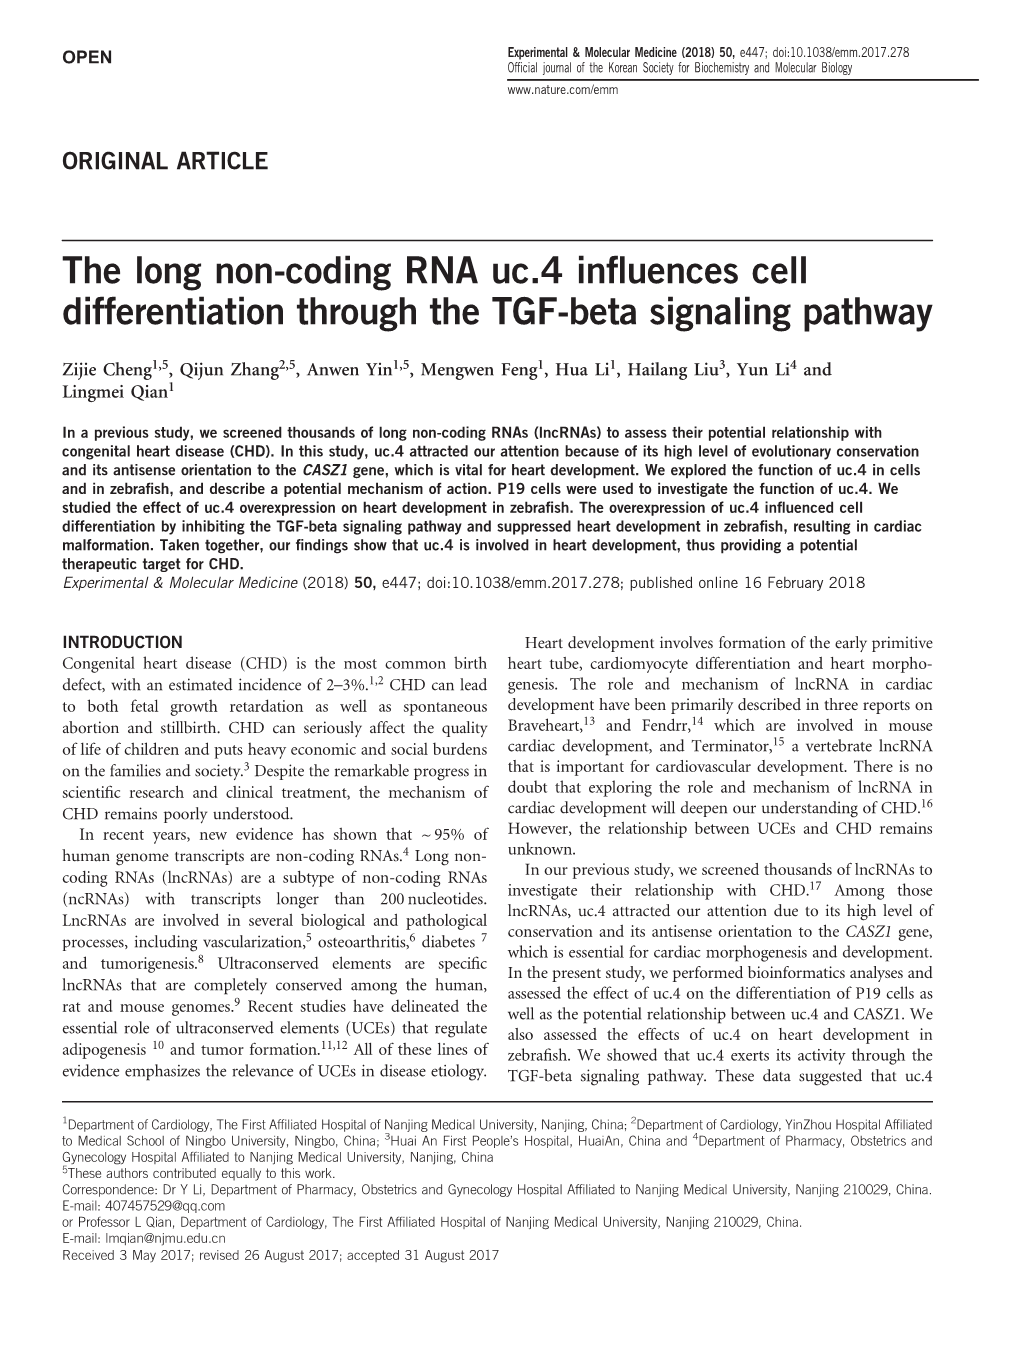 The Long Non-Coding RNA Uc.4 Influences Cell Differentiation Through the TGF-Beta Signaling Pathway